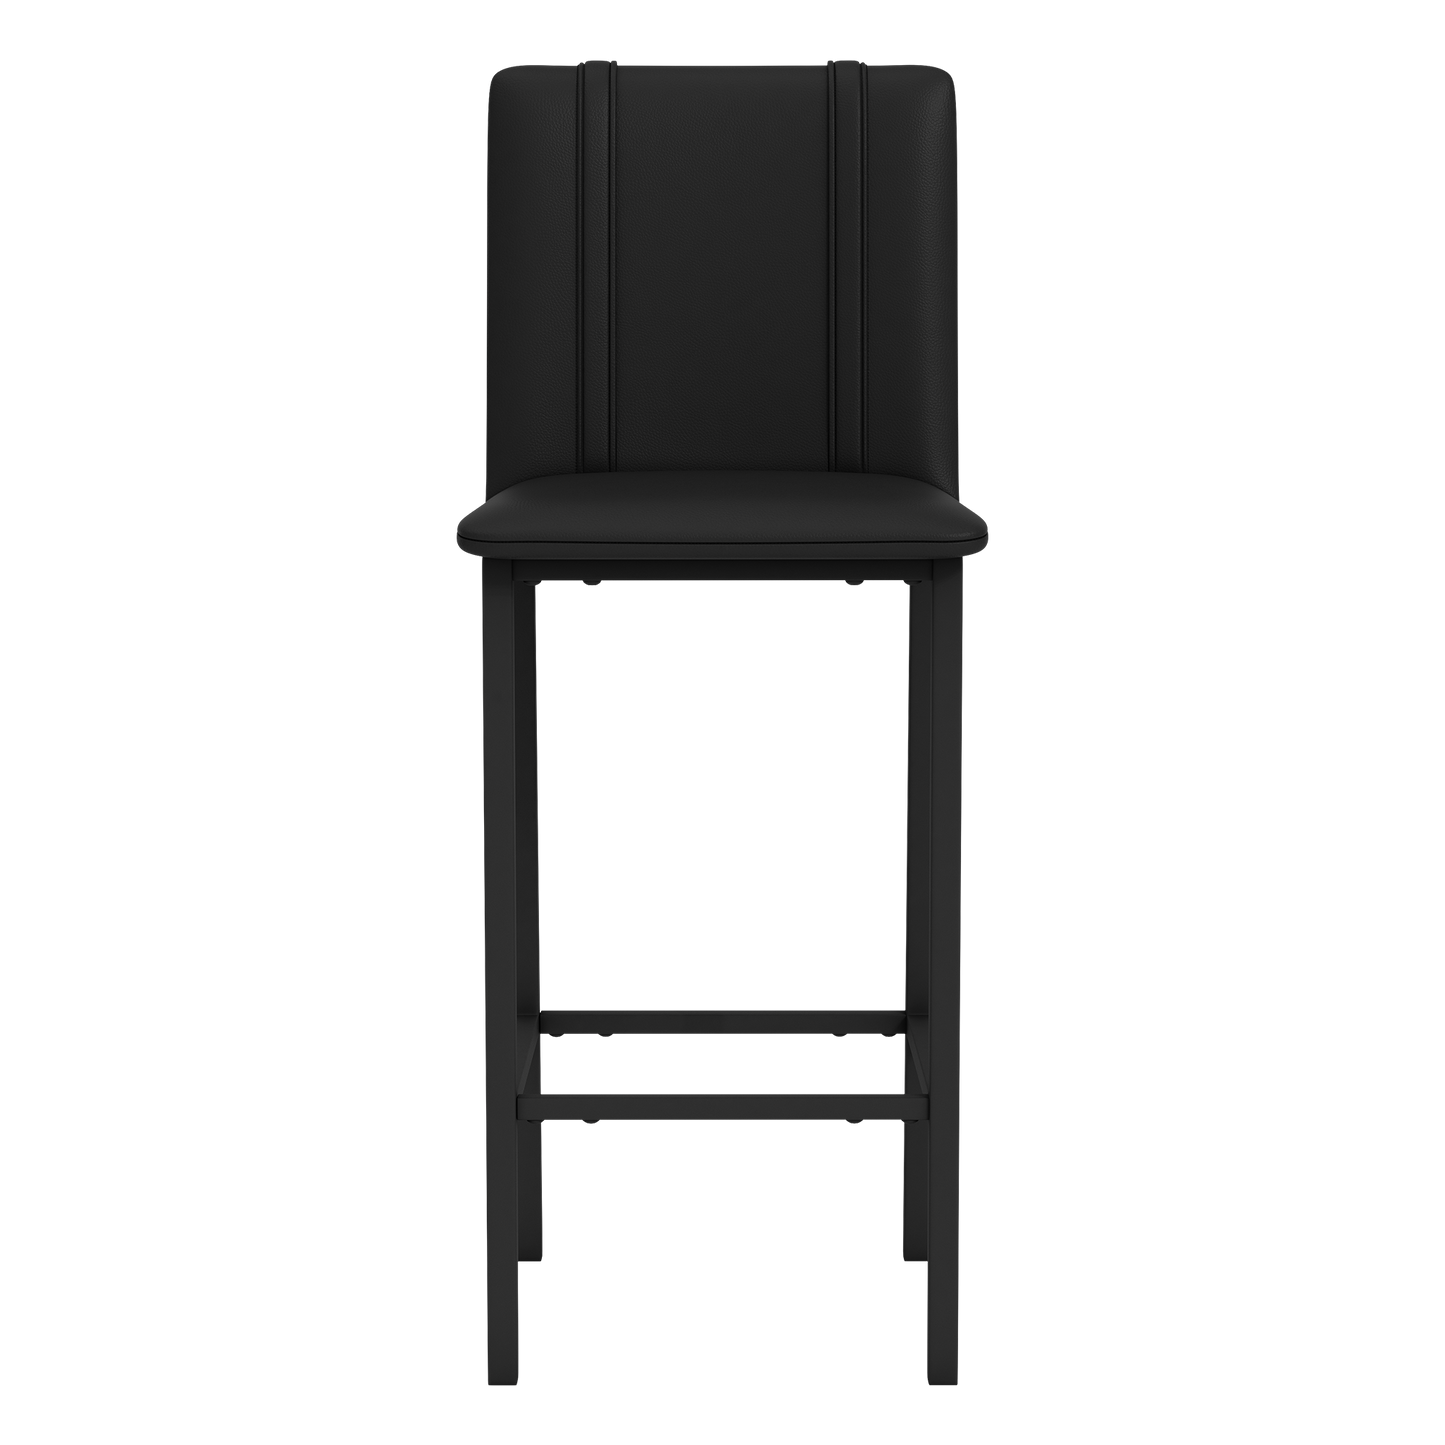 Bar Stool 500 with Baltimore Orioles Cooperstown Primary Set of 2